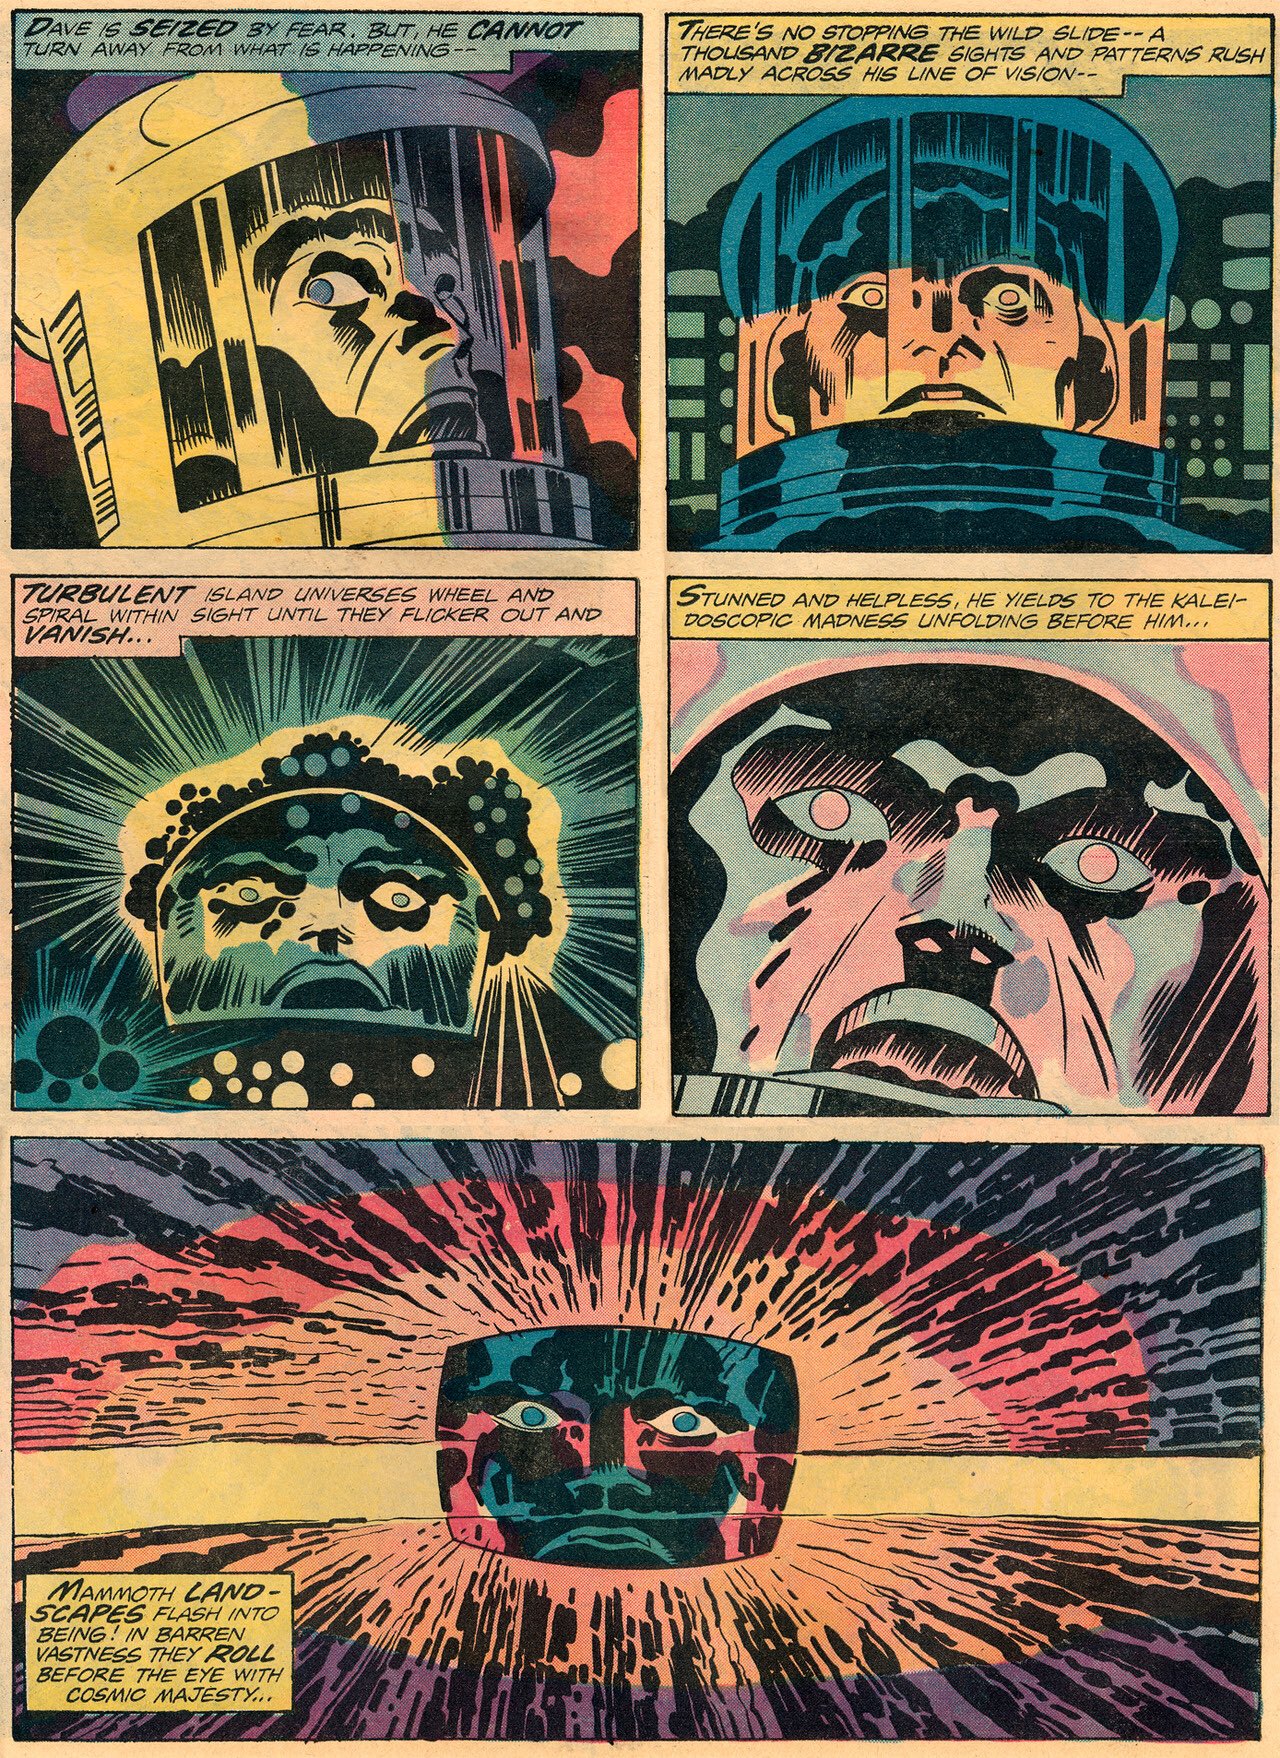 SciFi Art on X: Jack Kirby art from 2001 A Space Odyssey Marvel Treasury  Special, 1976 t.cotZSKQlLvuF  X